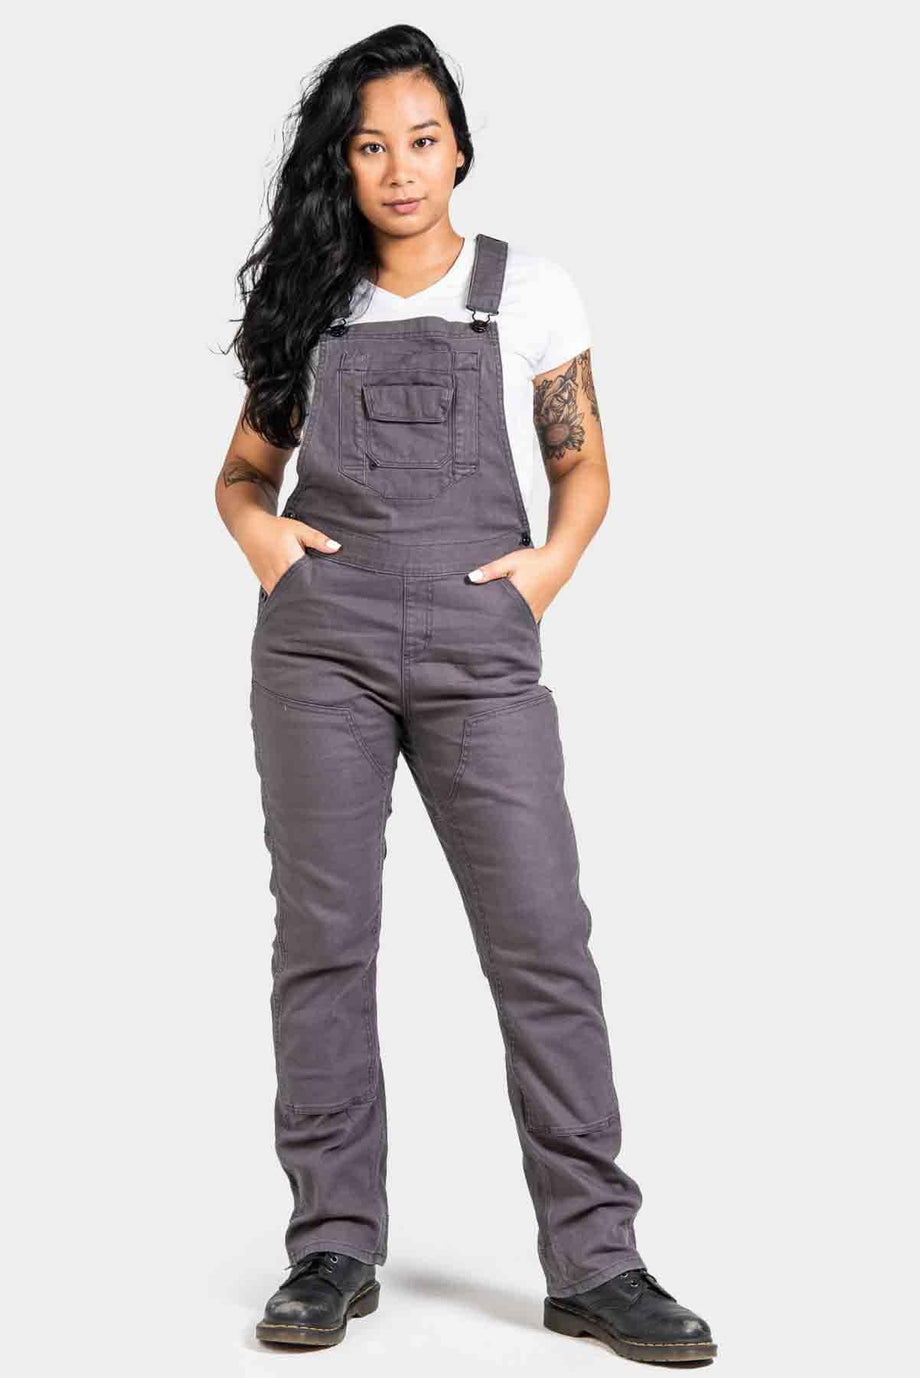 Dovetail Freshley Overall Wmn's